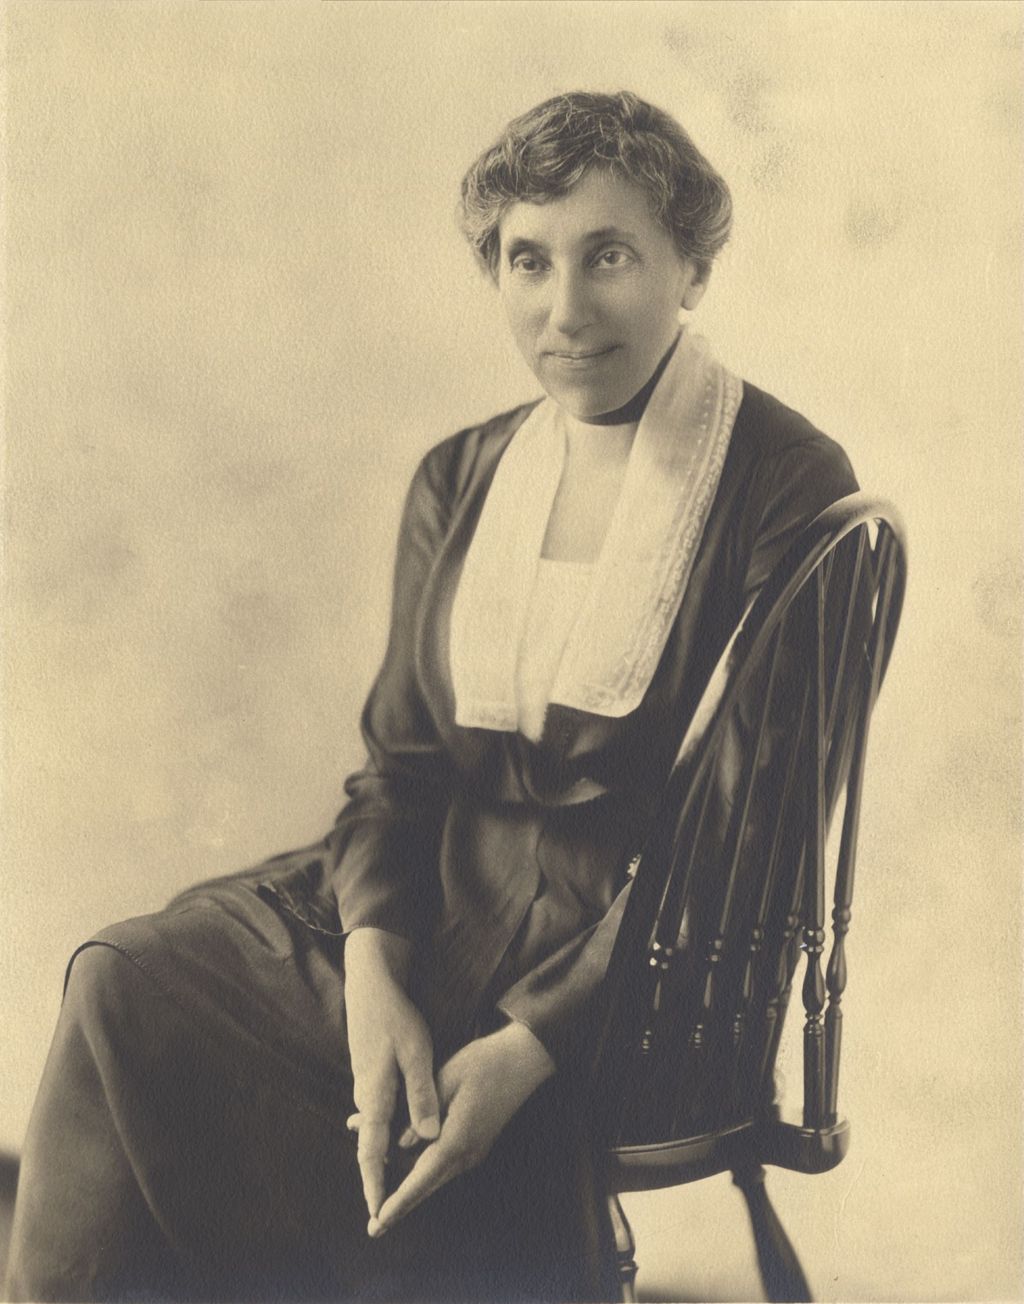 Hull-House resident and director of the United States Children's Bureau Julia Lathrop